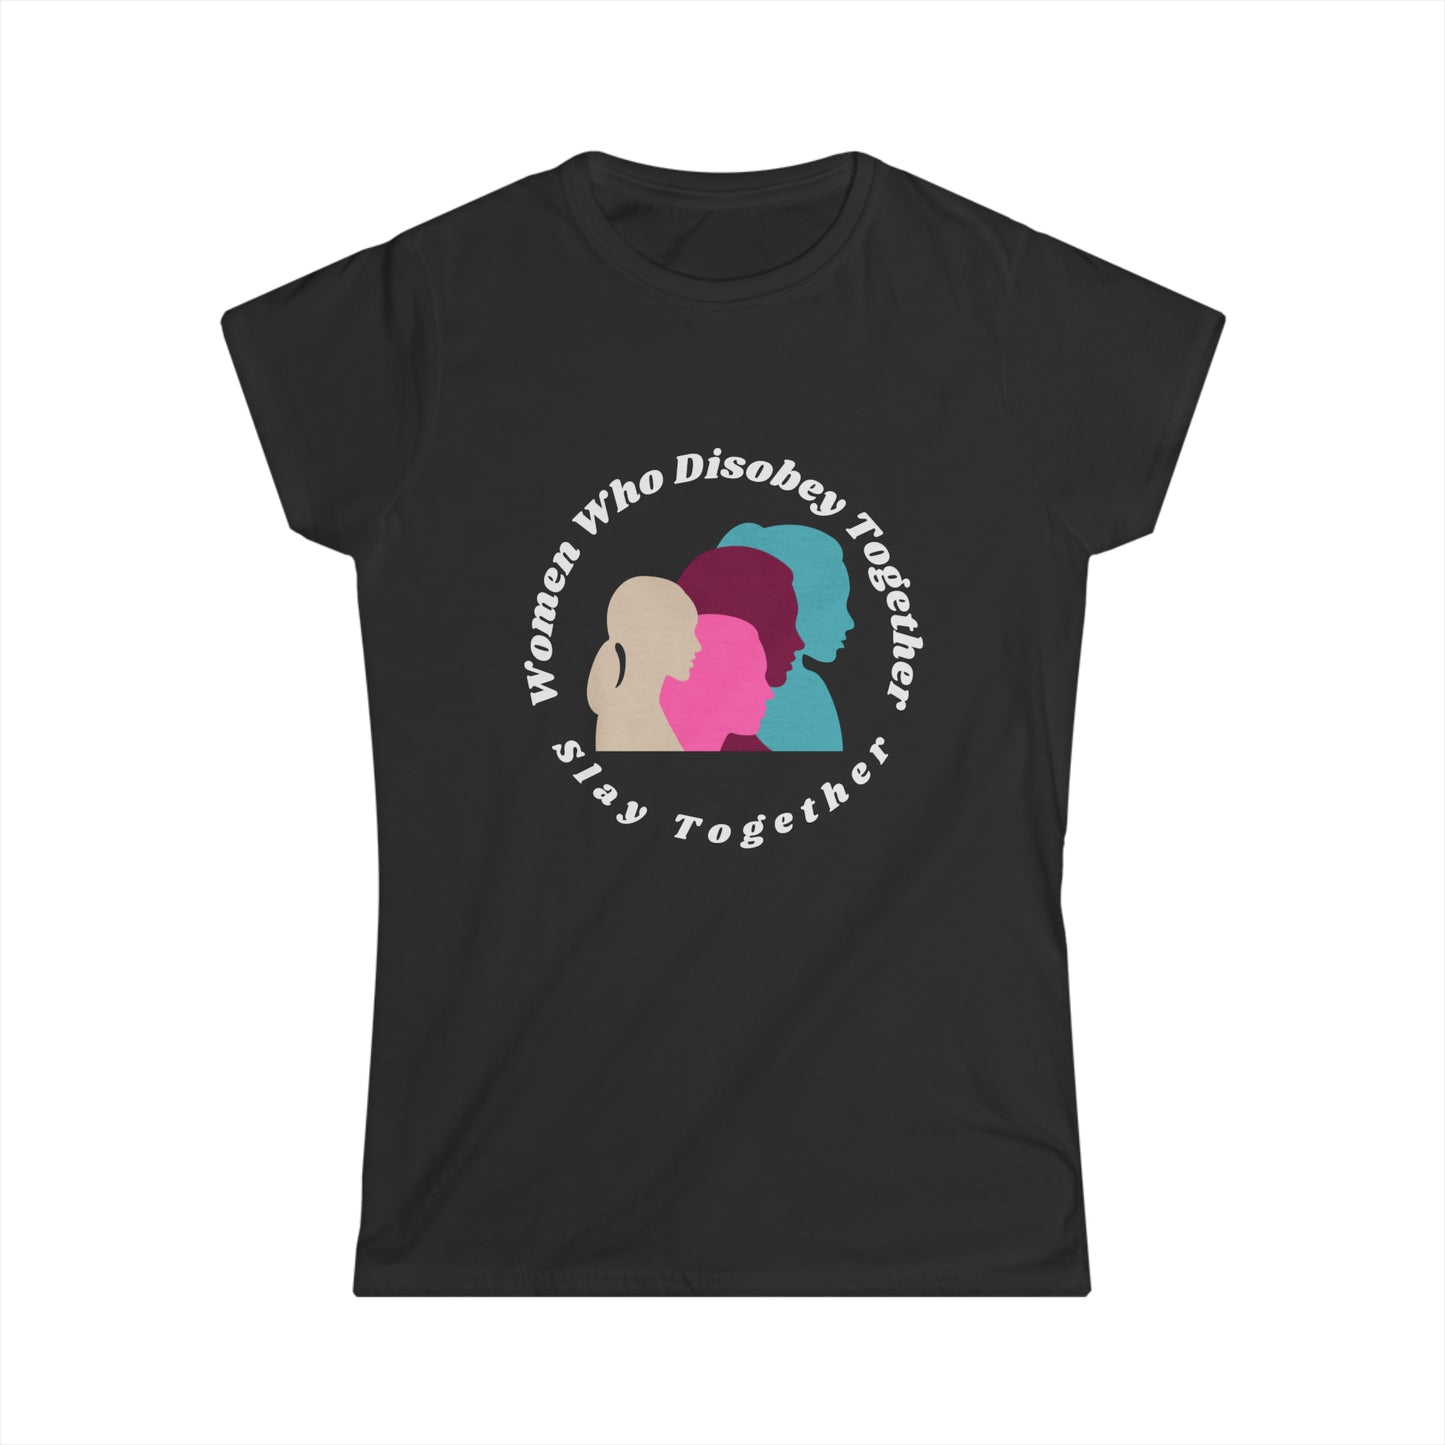 Women who Disobey Together, Slay Together Women's Softstyle Tee